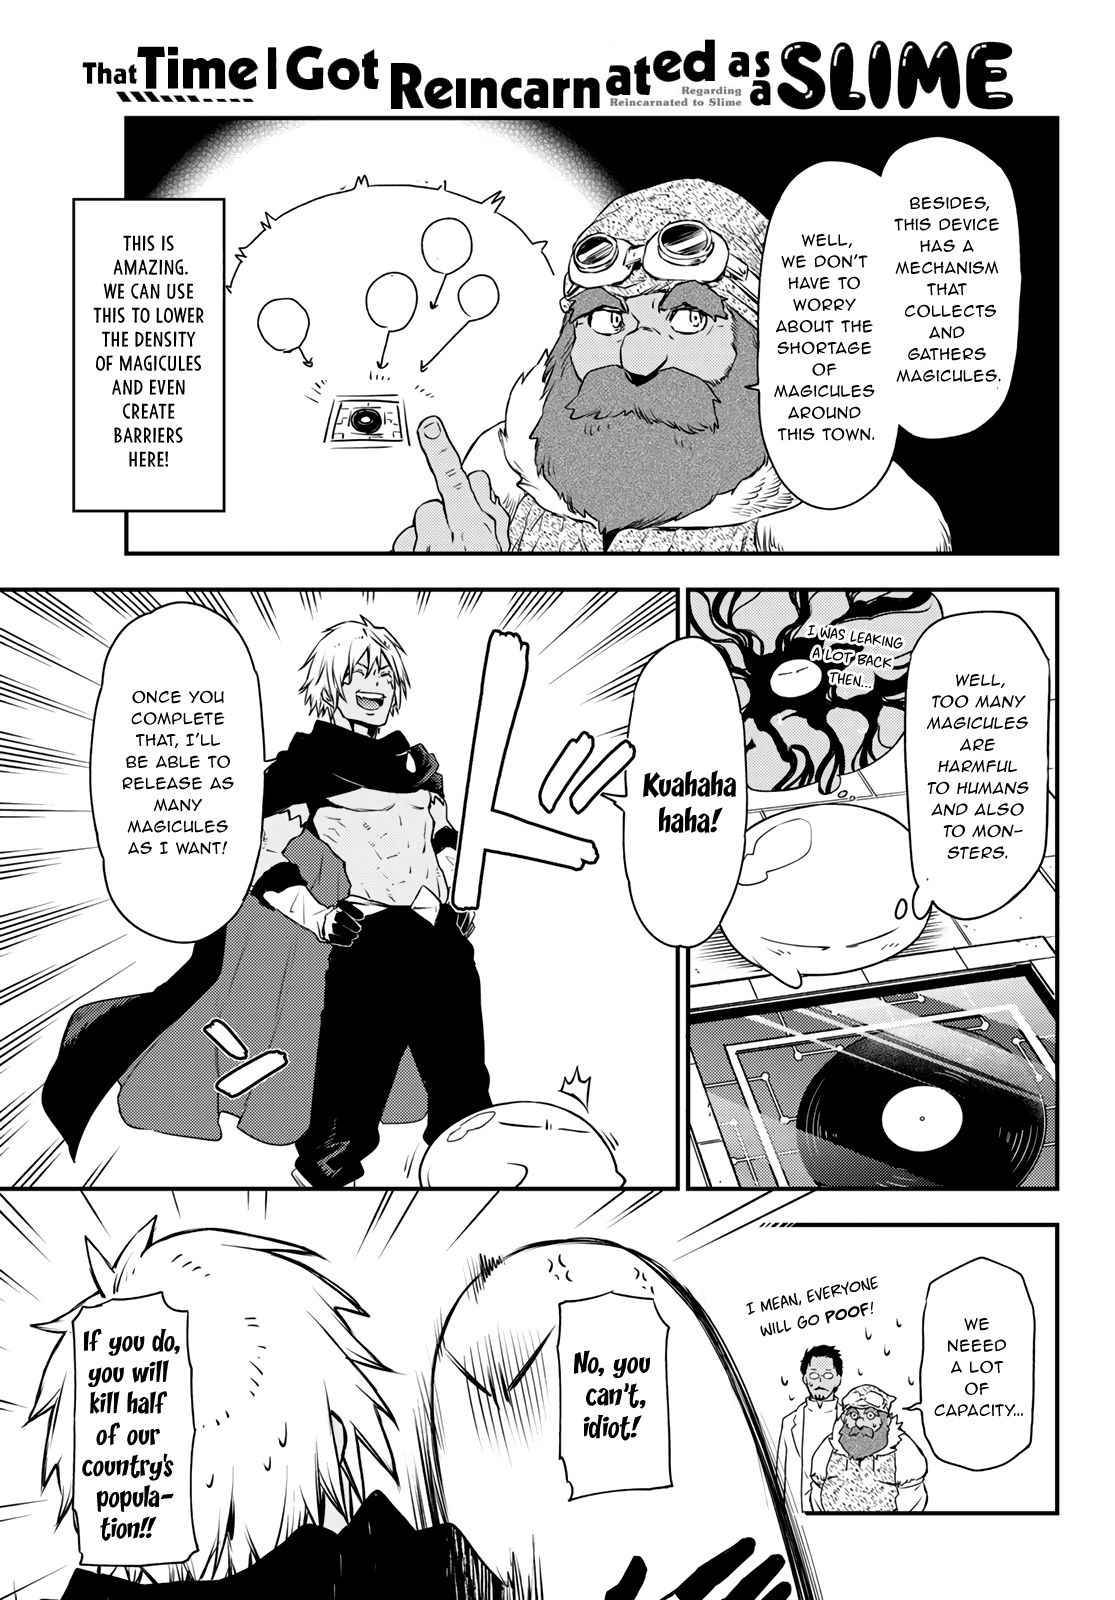 That Time I Got Reincarnated as a Slime, Chapter 90